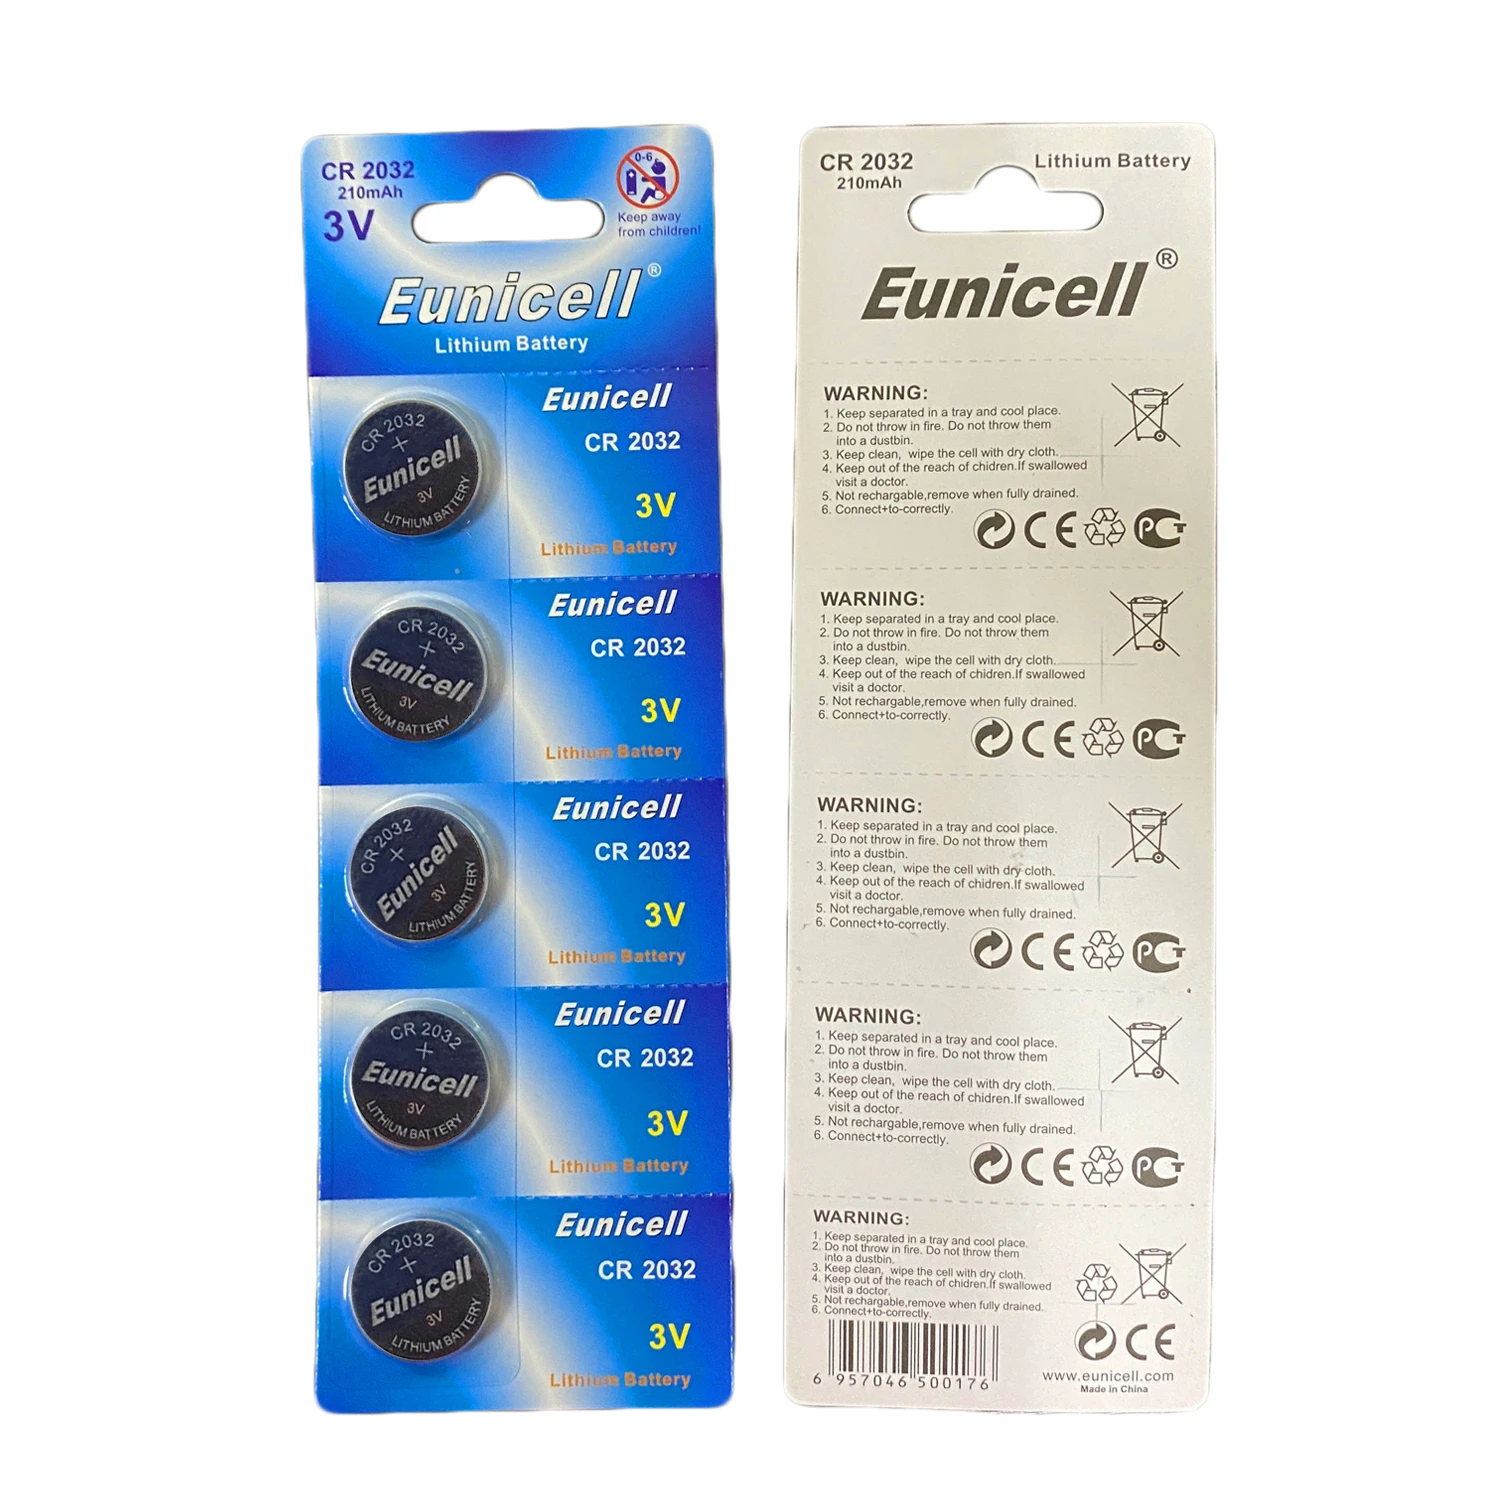 Wholesales Cell 3v Cr2032 Battery 5004lc Br2032 Dl2032 Ecr2032 Cr2032 Battery - Buy 3v Button Cell Battery Cr2032 Lir2032 Cr2025 Cr2016,Cr2032 Lithium Coin Cells Battery Cr2032 Product on Alibaba.com